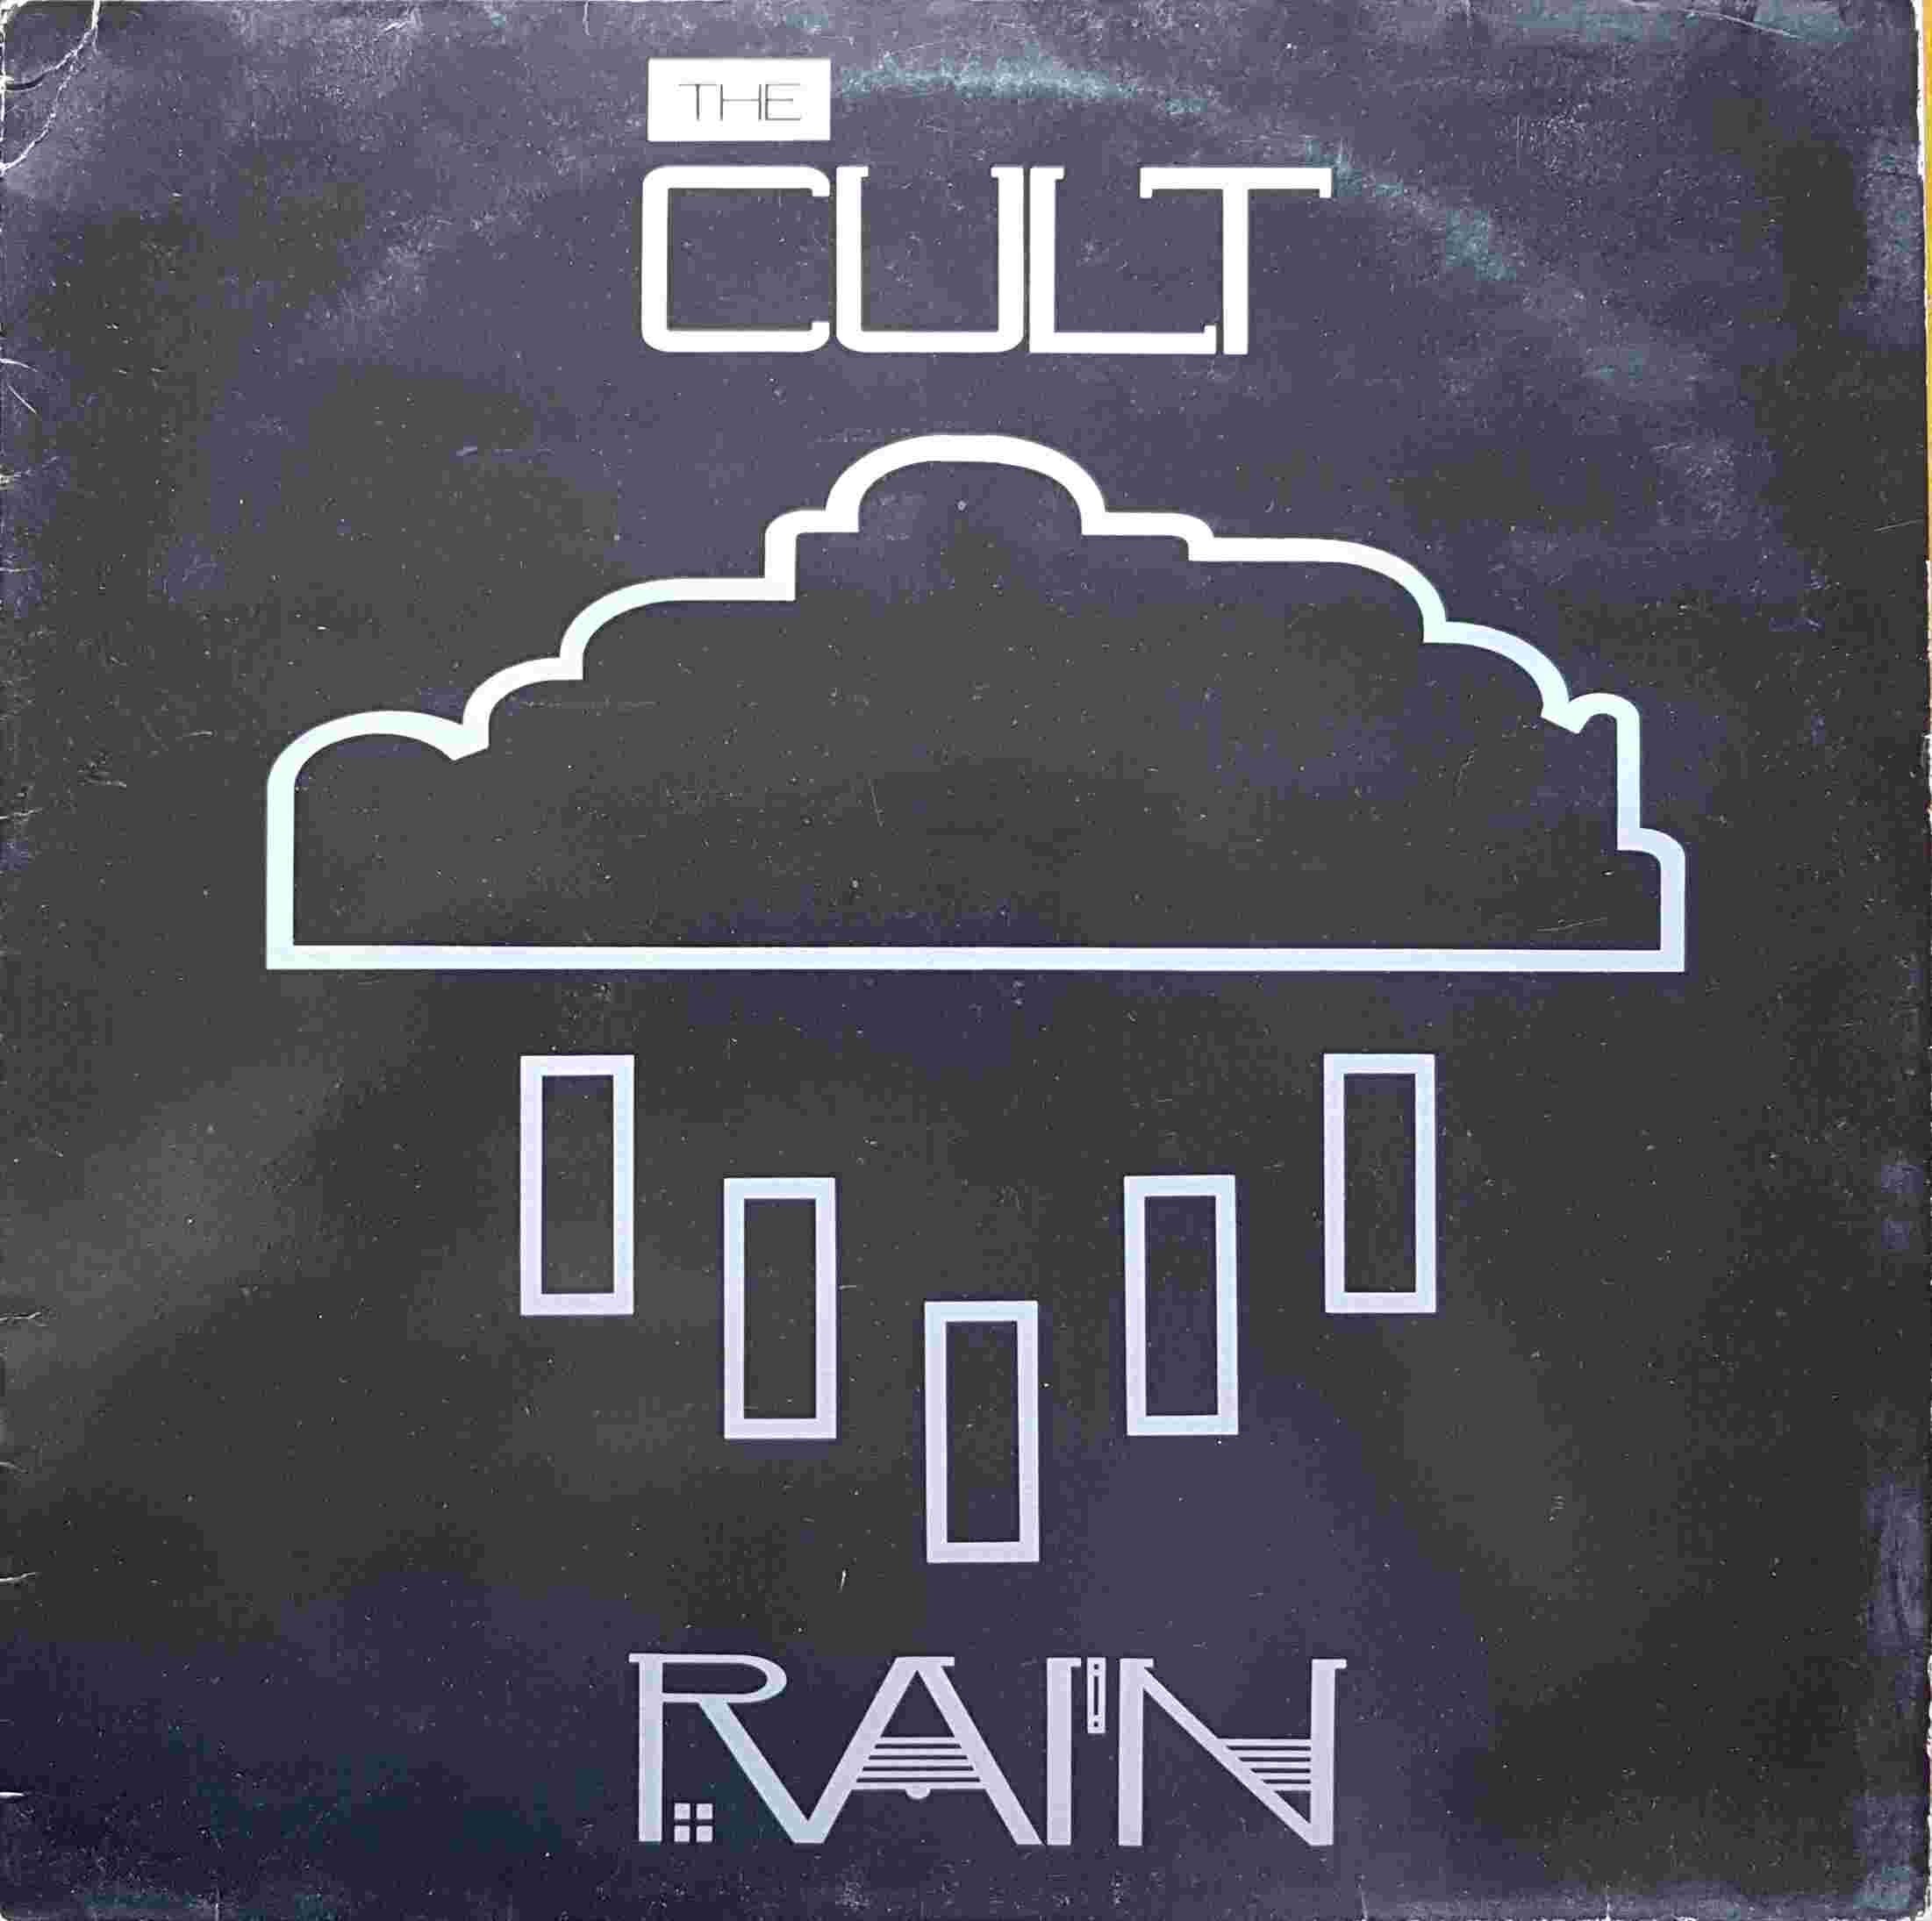 Picture of Rain little face by artist Astbury / Duffy / The Cult 